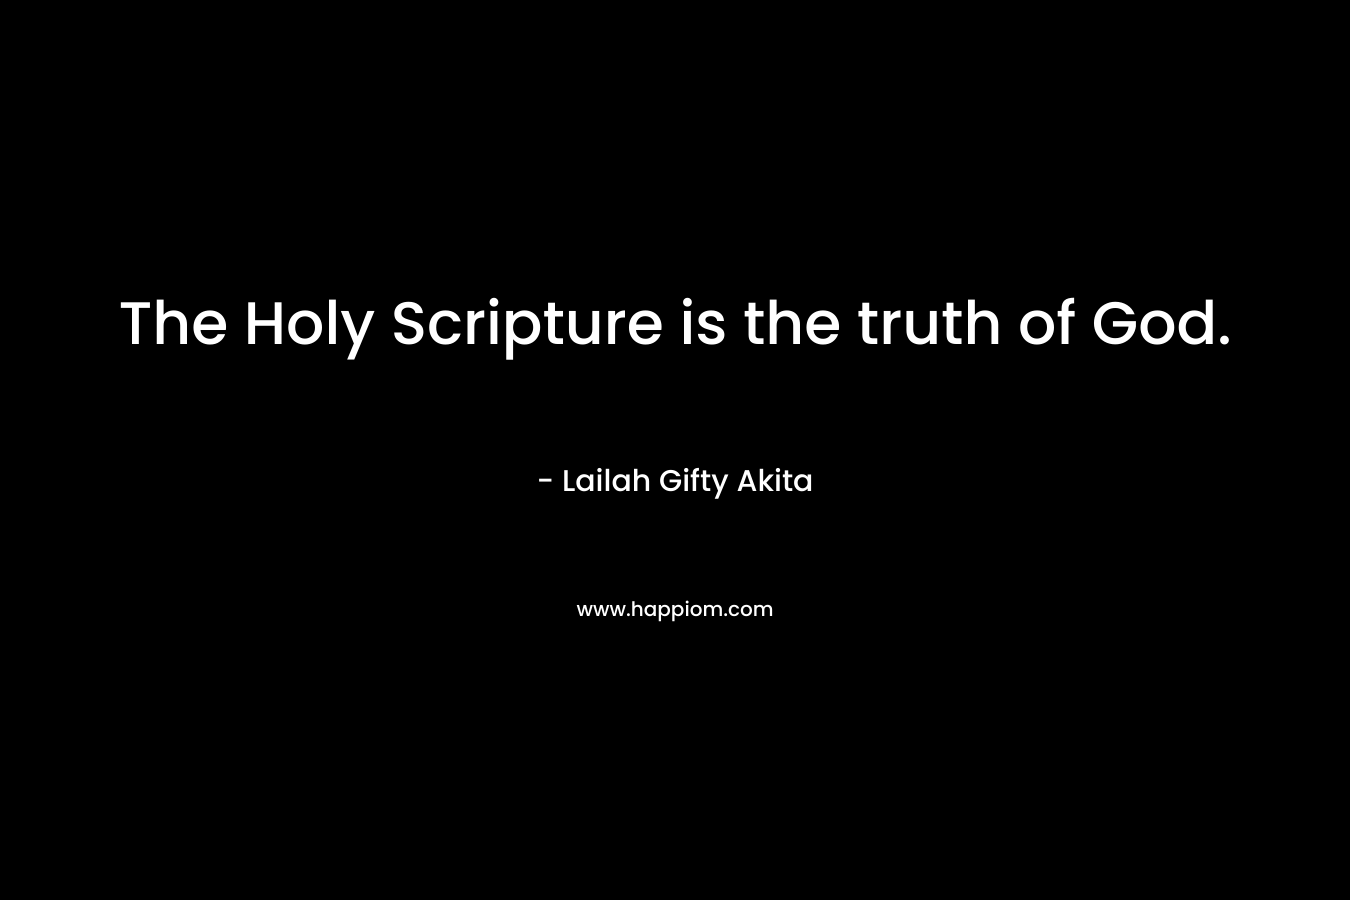 The Holy Scripture is the truth of God.